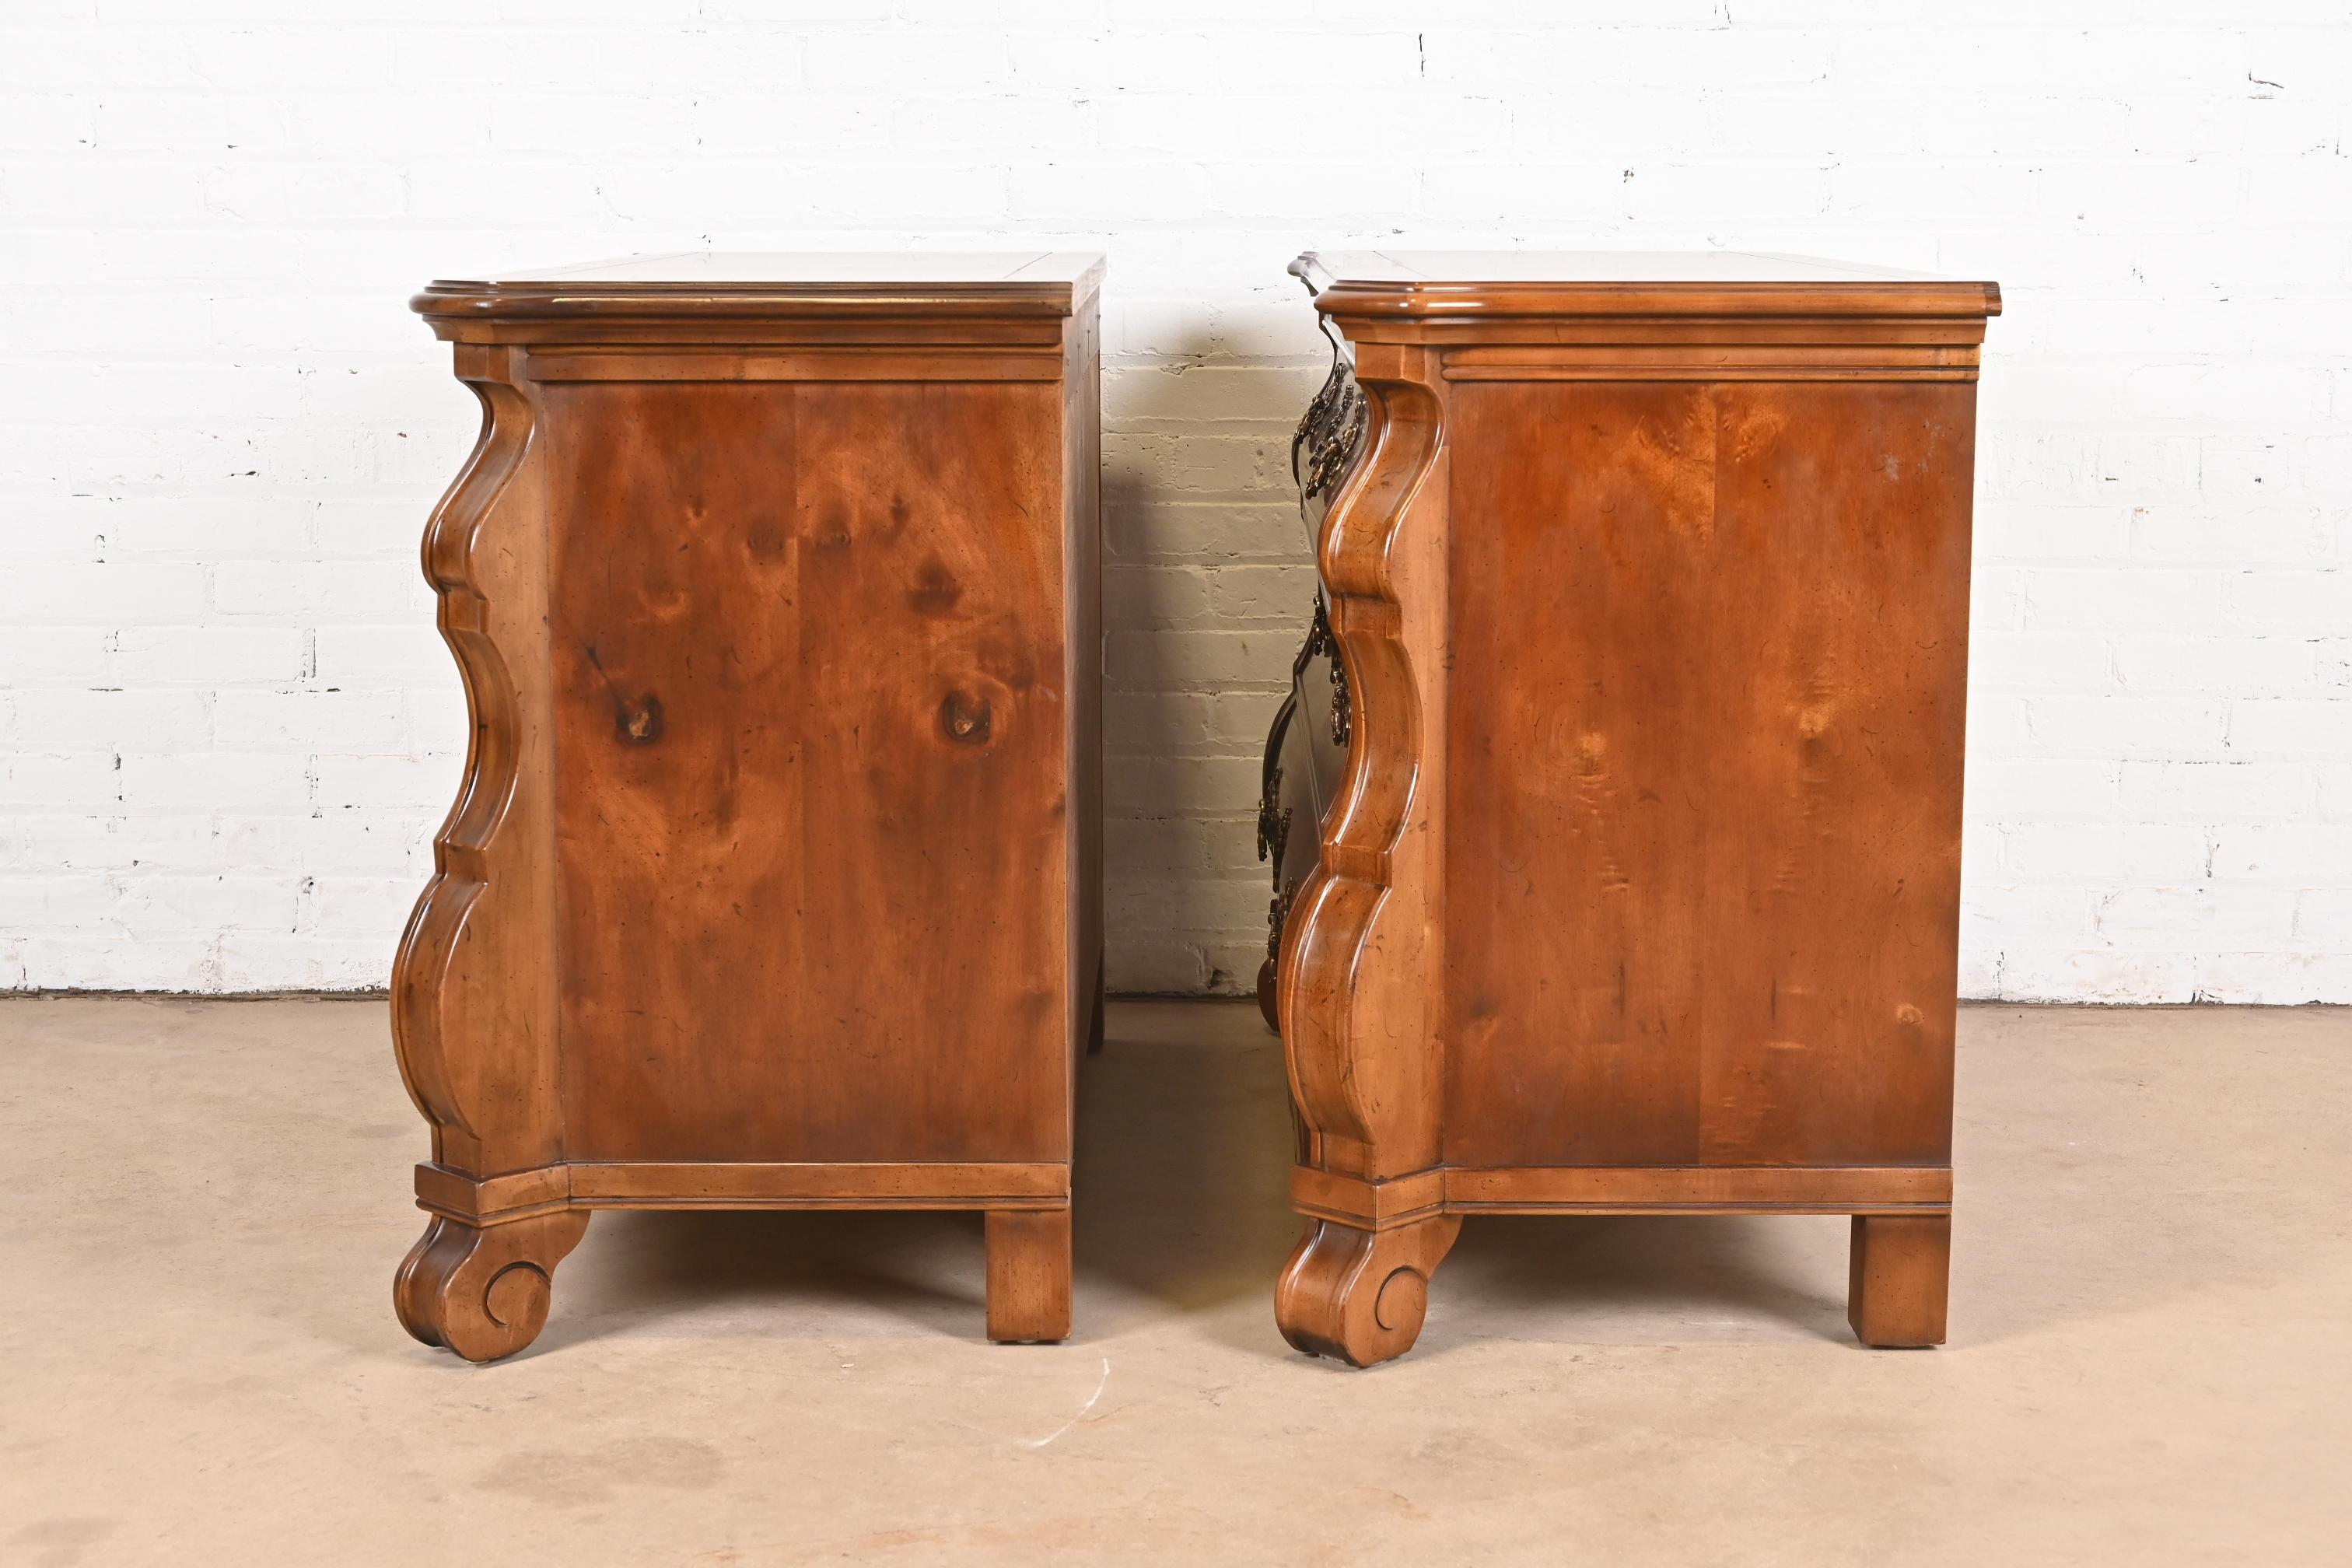 Henredon Italian Baroque Burled Mahogany Bombay Chests or Commodes, Pair For Sale 12